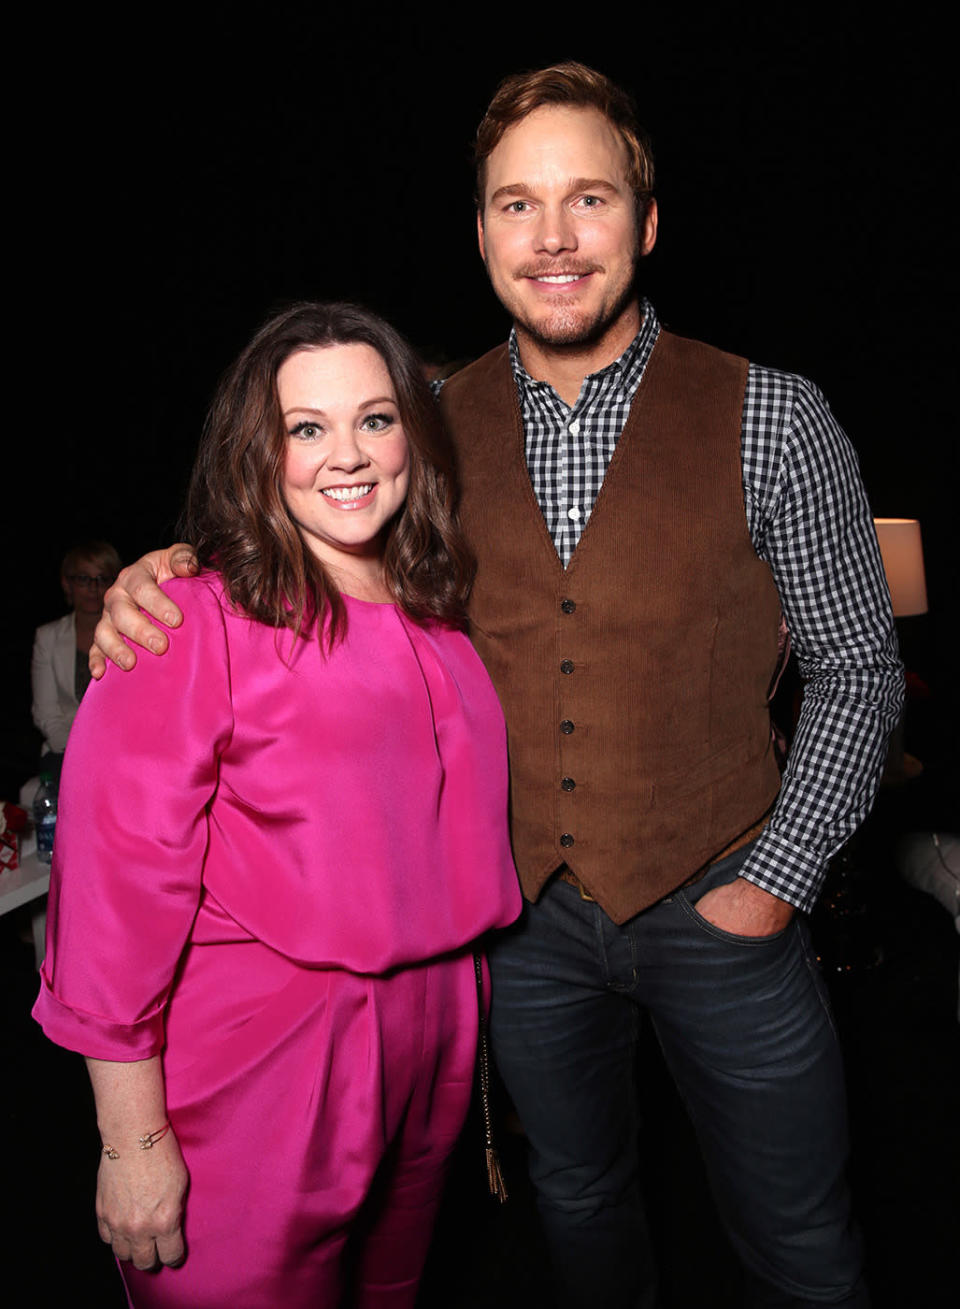 <p>Melissa McCarthy and Chris Pratt at CinemaCon 2016 on April 12. <i>(Photo: Todd Williamson/Getty Images)</i></p>